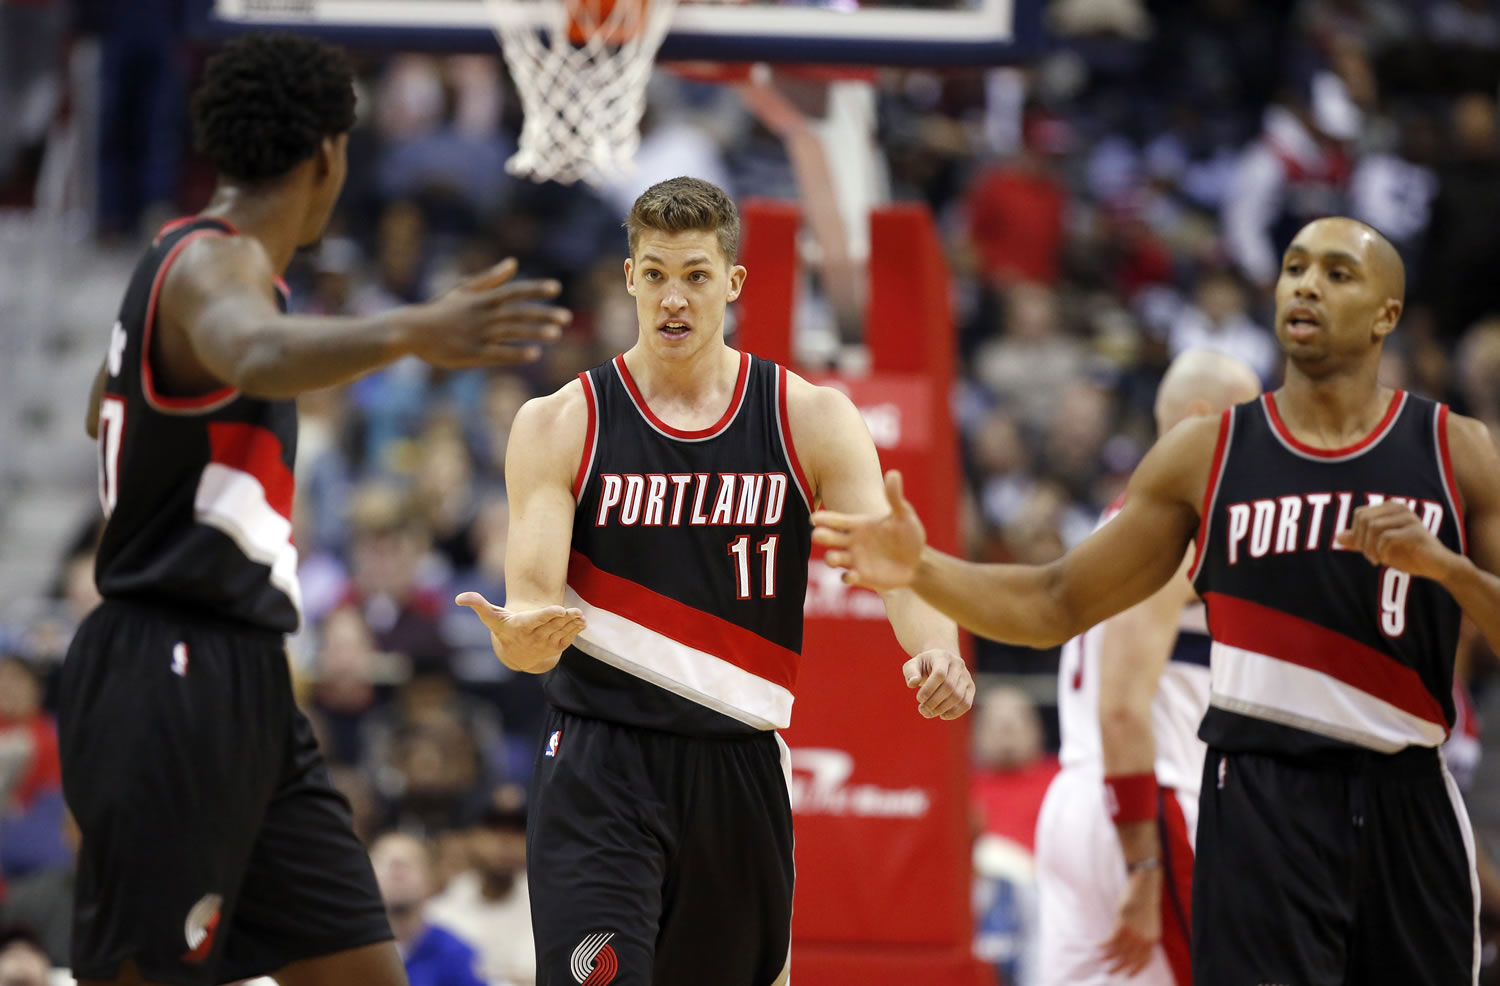 Portland Trail Blazers center Ed Davis, left, forward Meyers Leonard (11) and guard Gerald Henderson (9) celebrate in the second half of an NBA basketball game against the Washington Wizards, Monday, Jan. 18, 2016, in Washington. The Trail Blazers won 108-98.